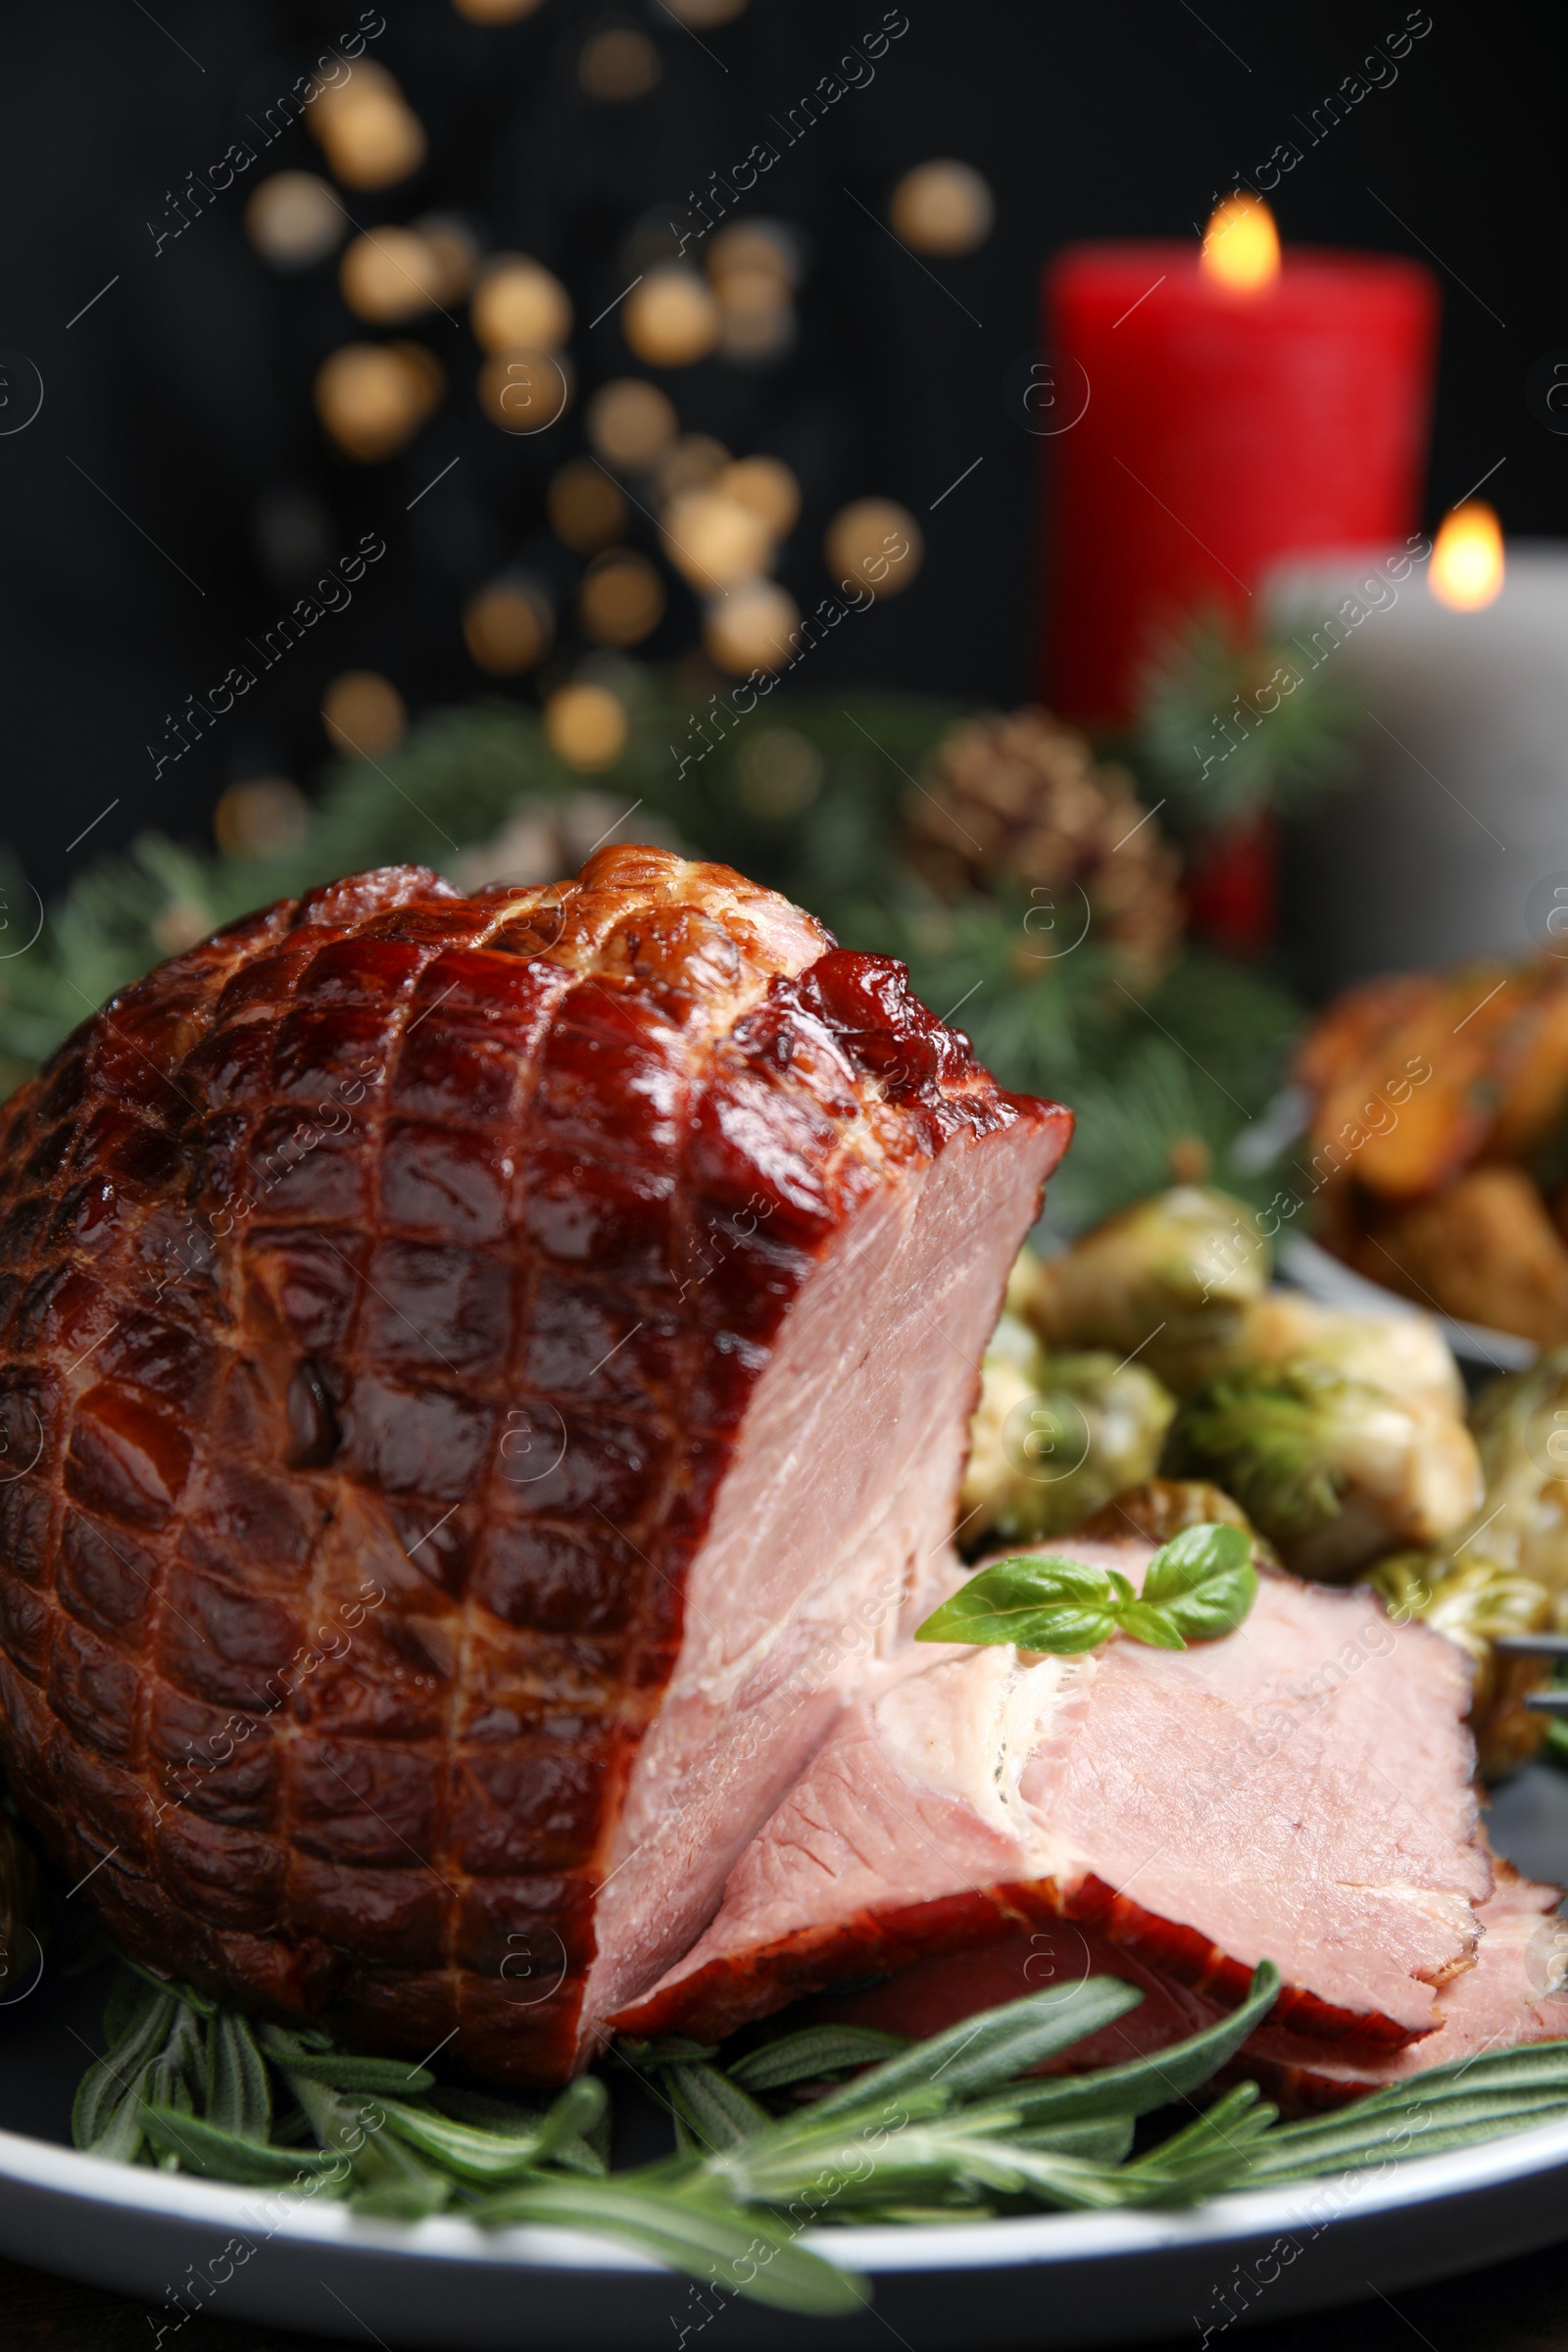 Photo of Delicious ham served with rosemary on plate against blurred festive lights. Christmas dinner